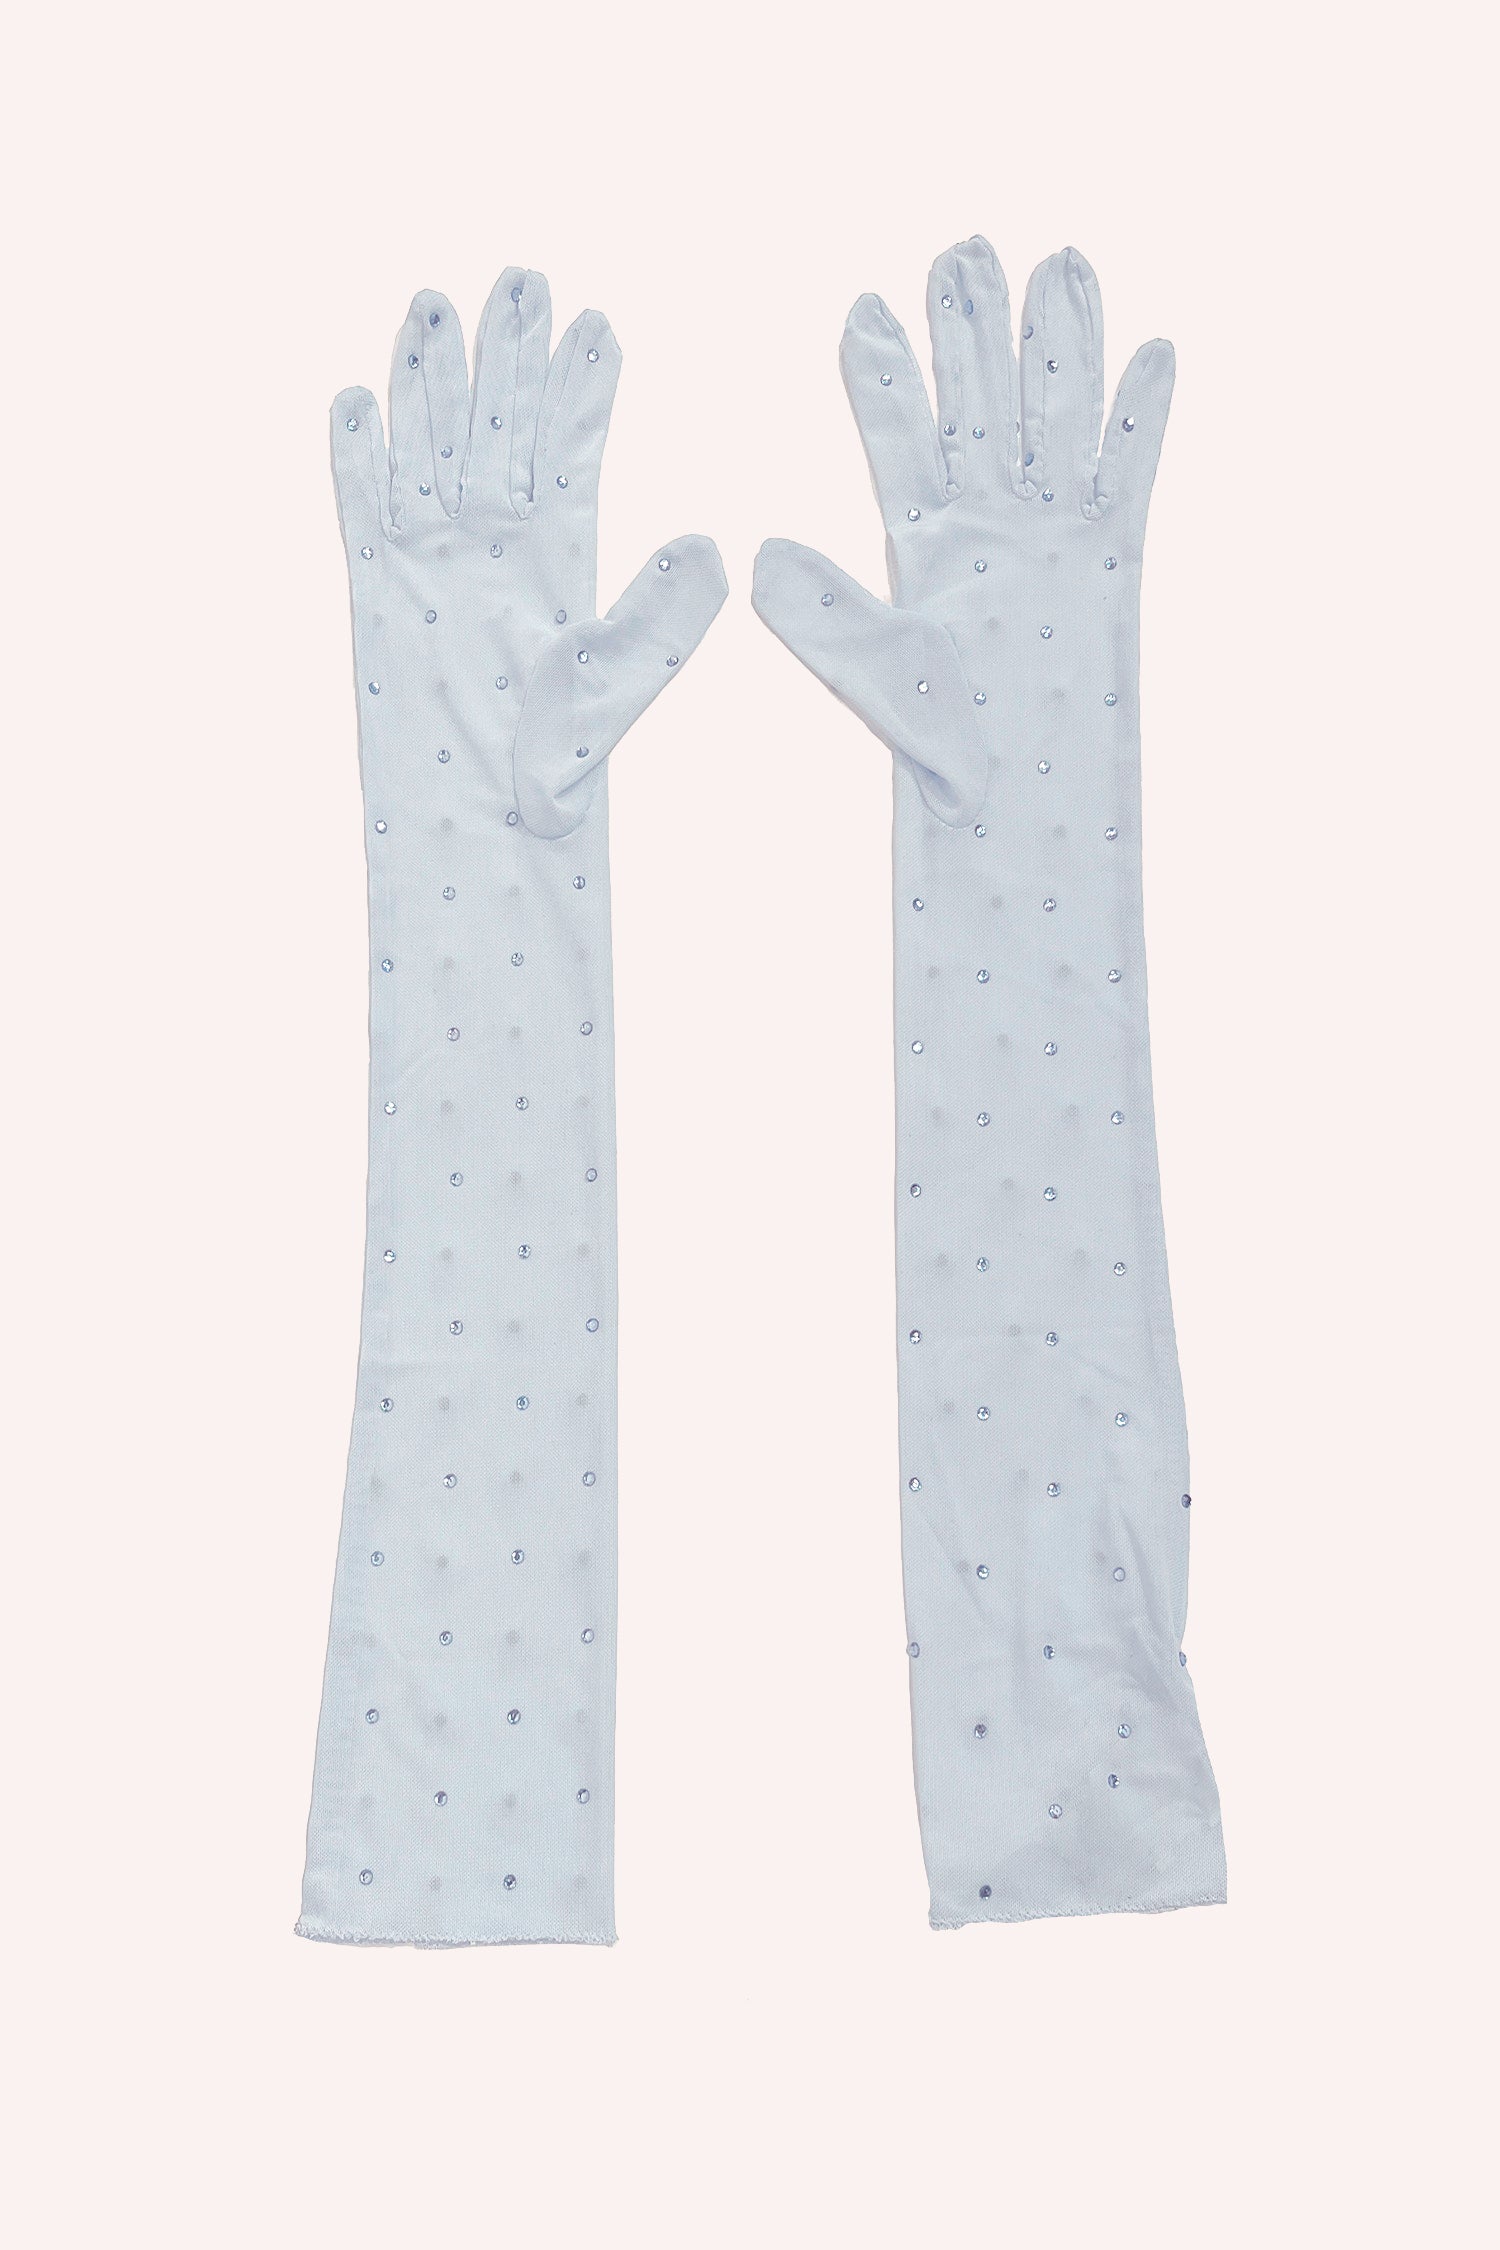 Rhinestone Mesh Gloves powder blue, blue  stones placed in a diamond shapes, elbow long